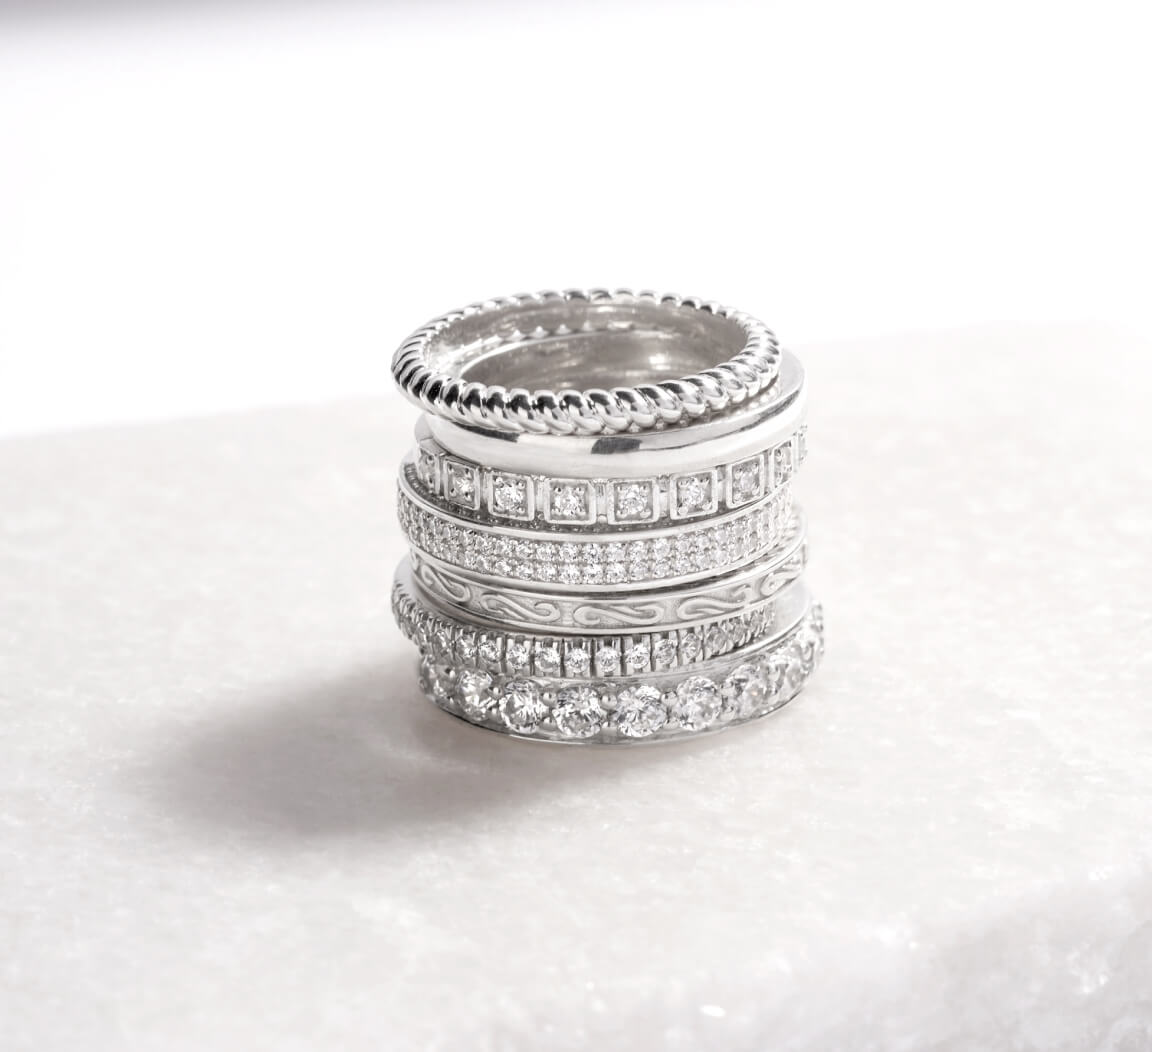 Adding a Personal Touch By Customizing Your Vintage Style Wedding Ring